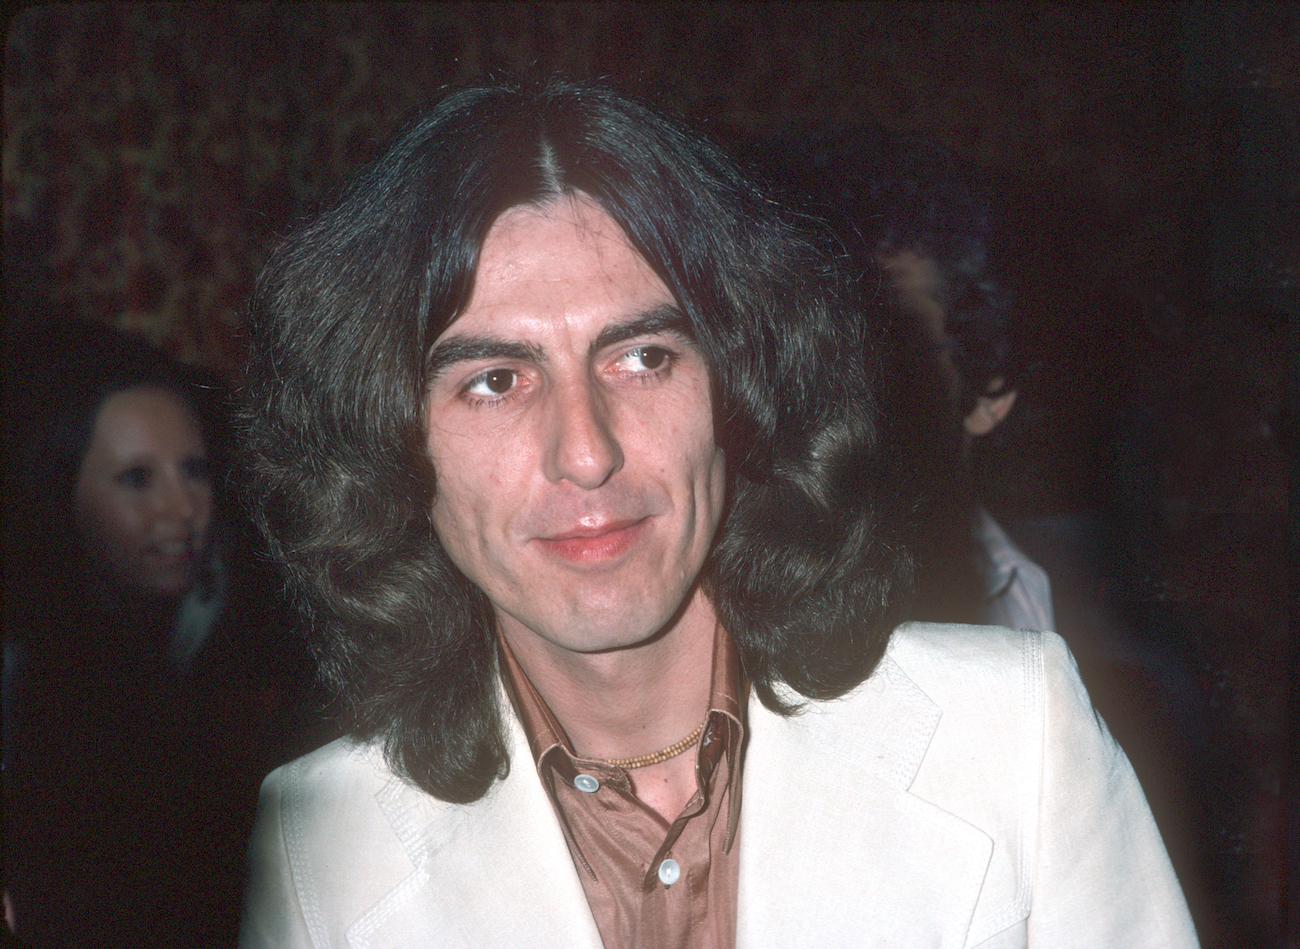 George Harrison Said He Gardened Through the Punk Movement: ‘I Just Kept My Head Down’